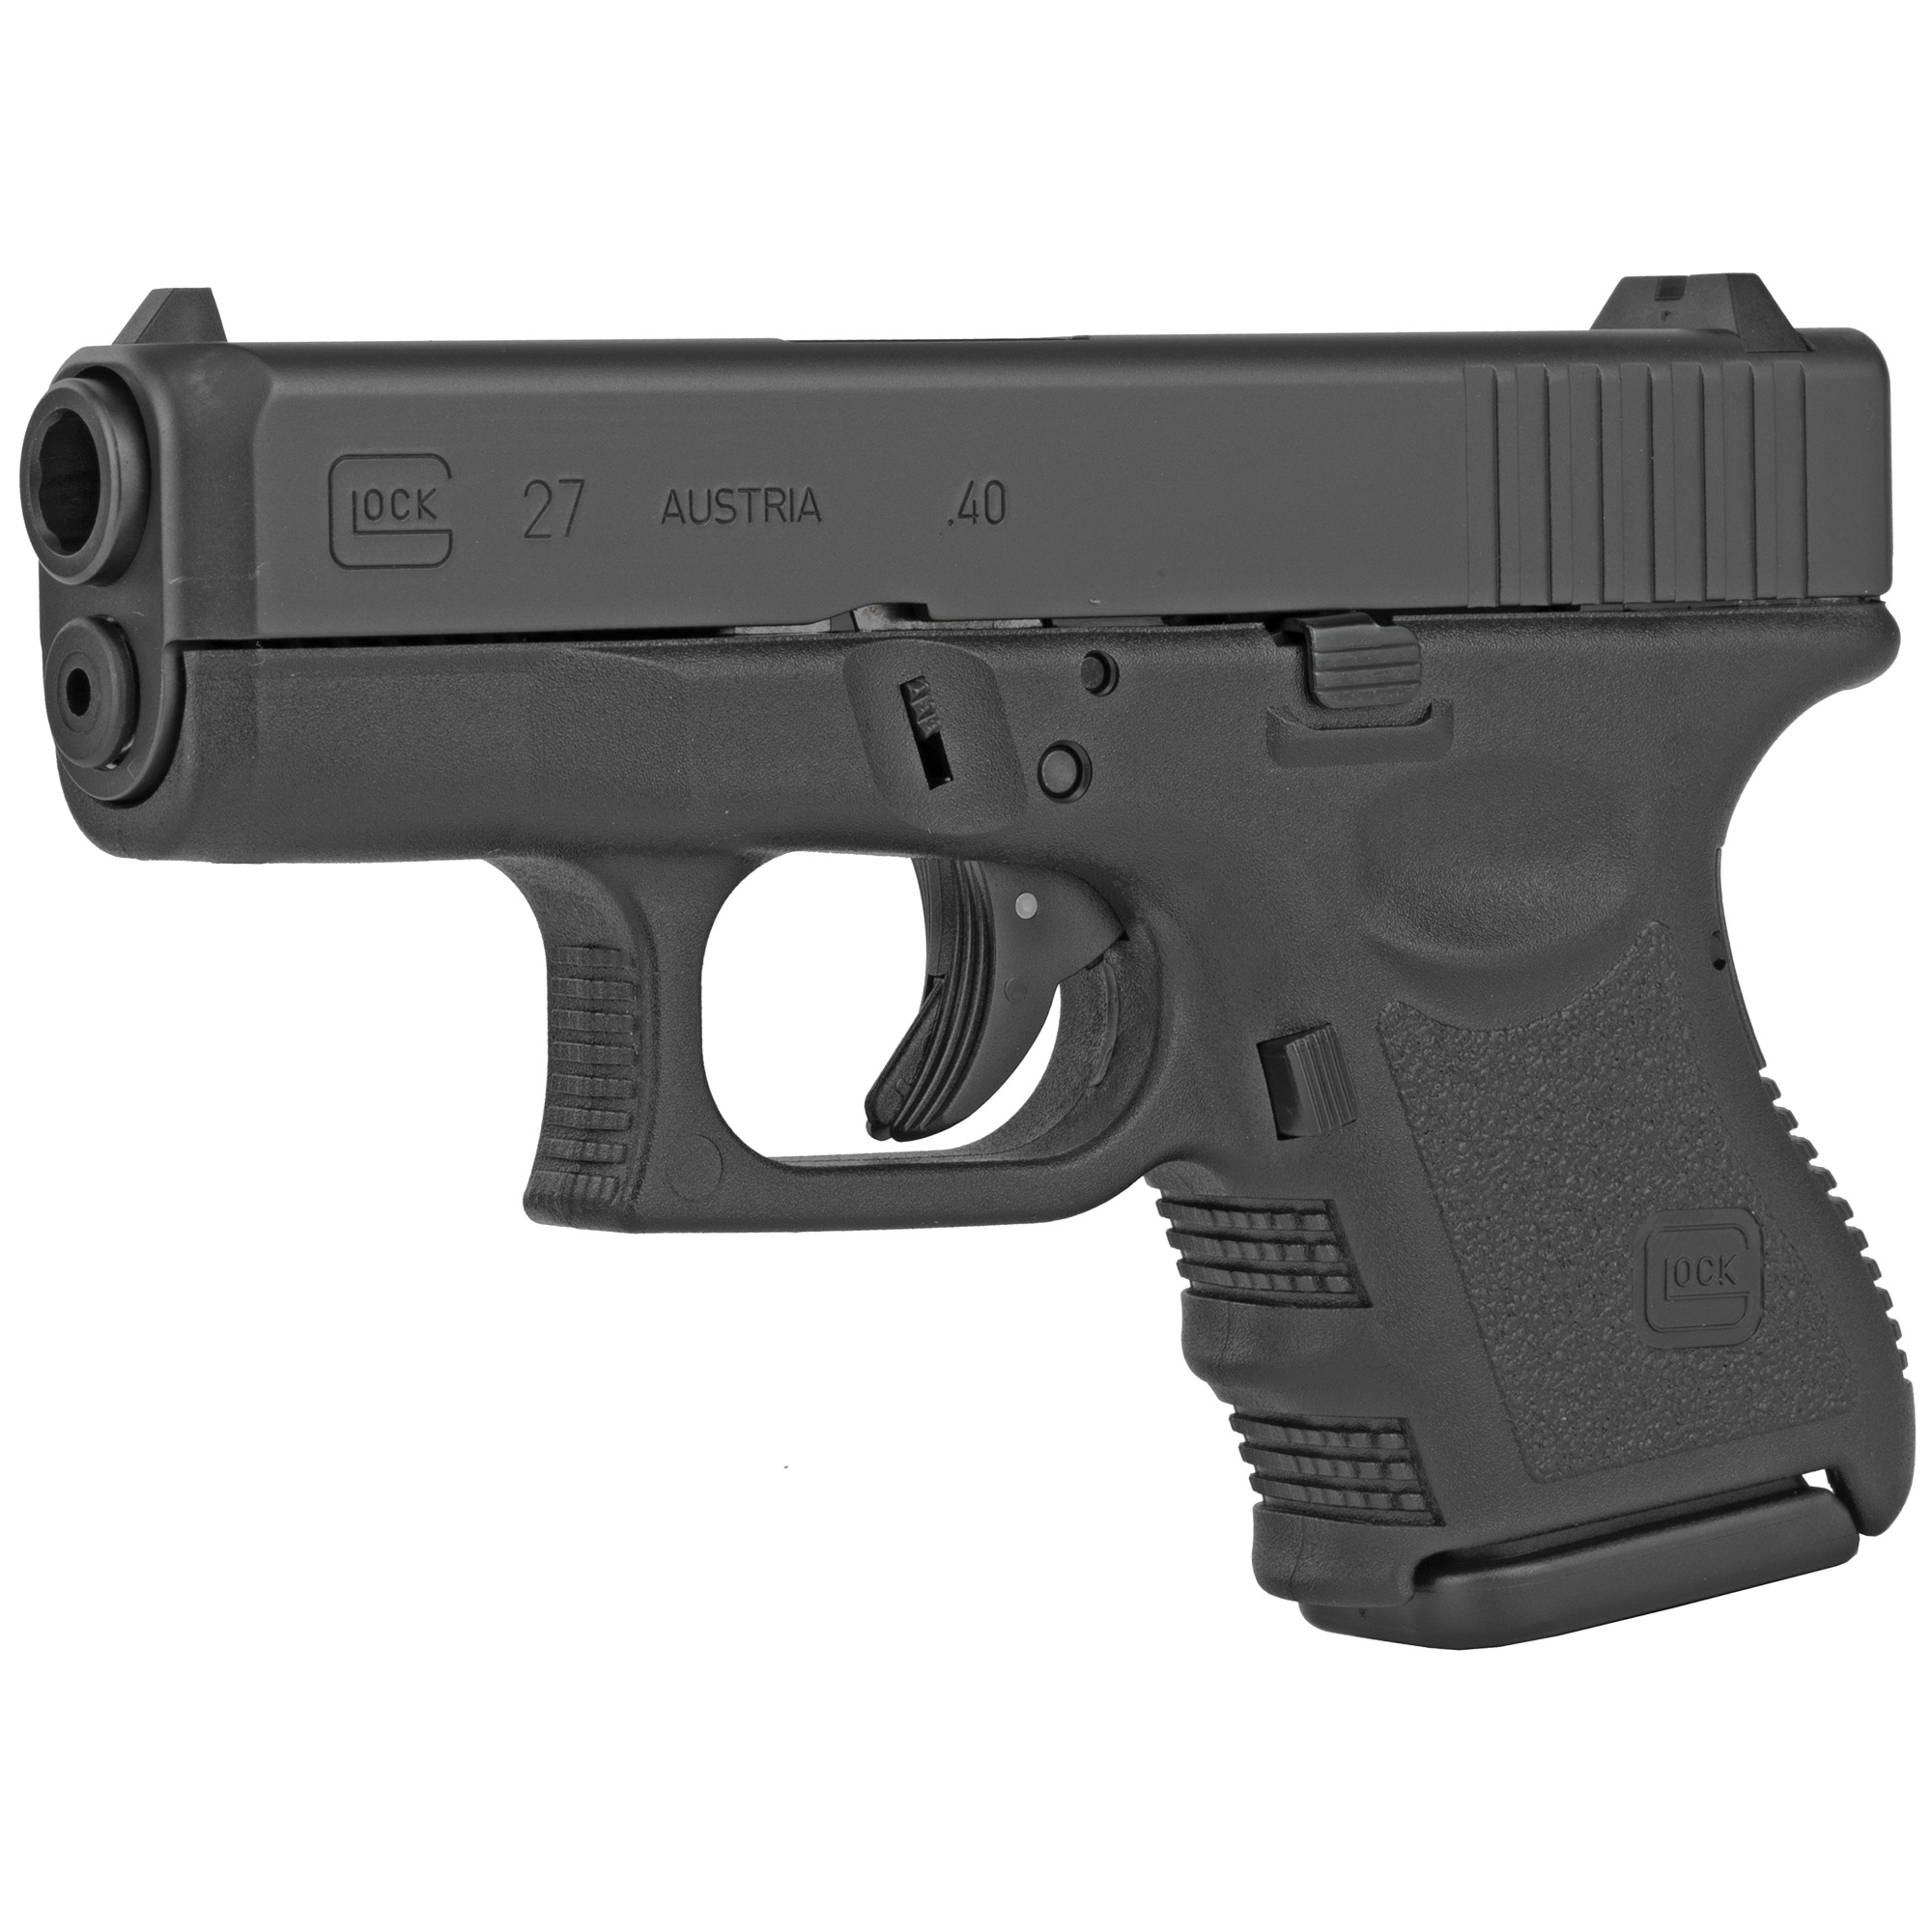 Glock, 27 Gen3, Striker Fired, Semi-automatic, Polymer Frame Pistol, Sub-Compact, 40 S&W, 3.43" Barrel, Matte Finish, Black, Fixed Sights, 9 Rounds, 2 Magazines, Right Hand